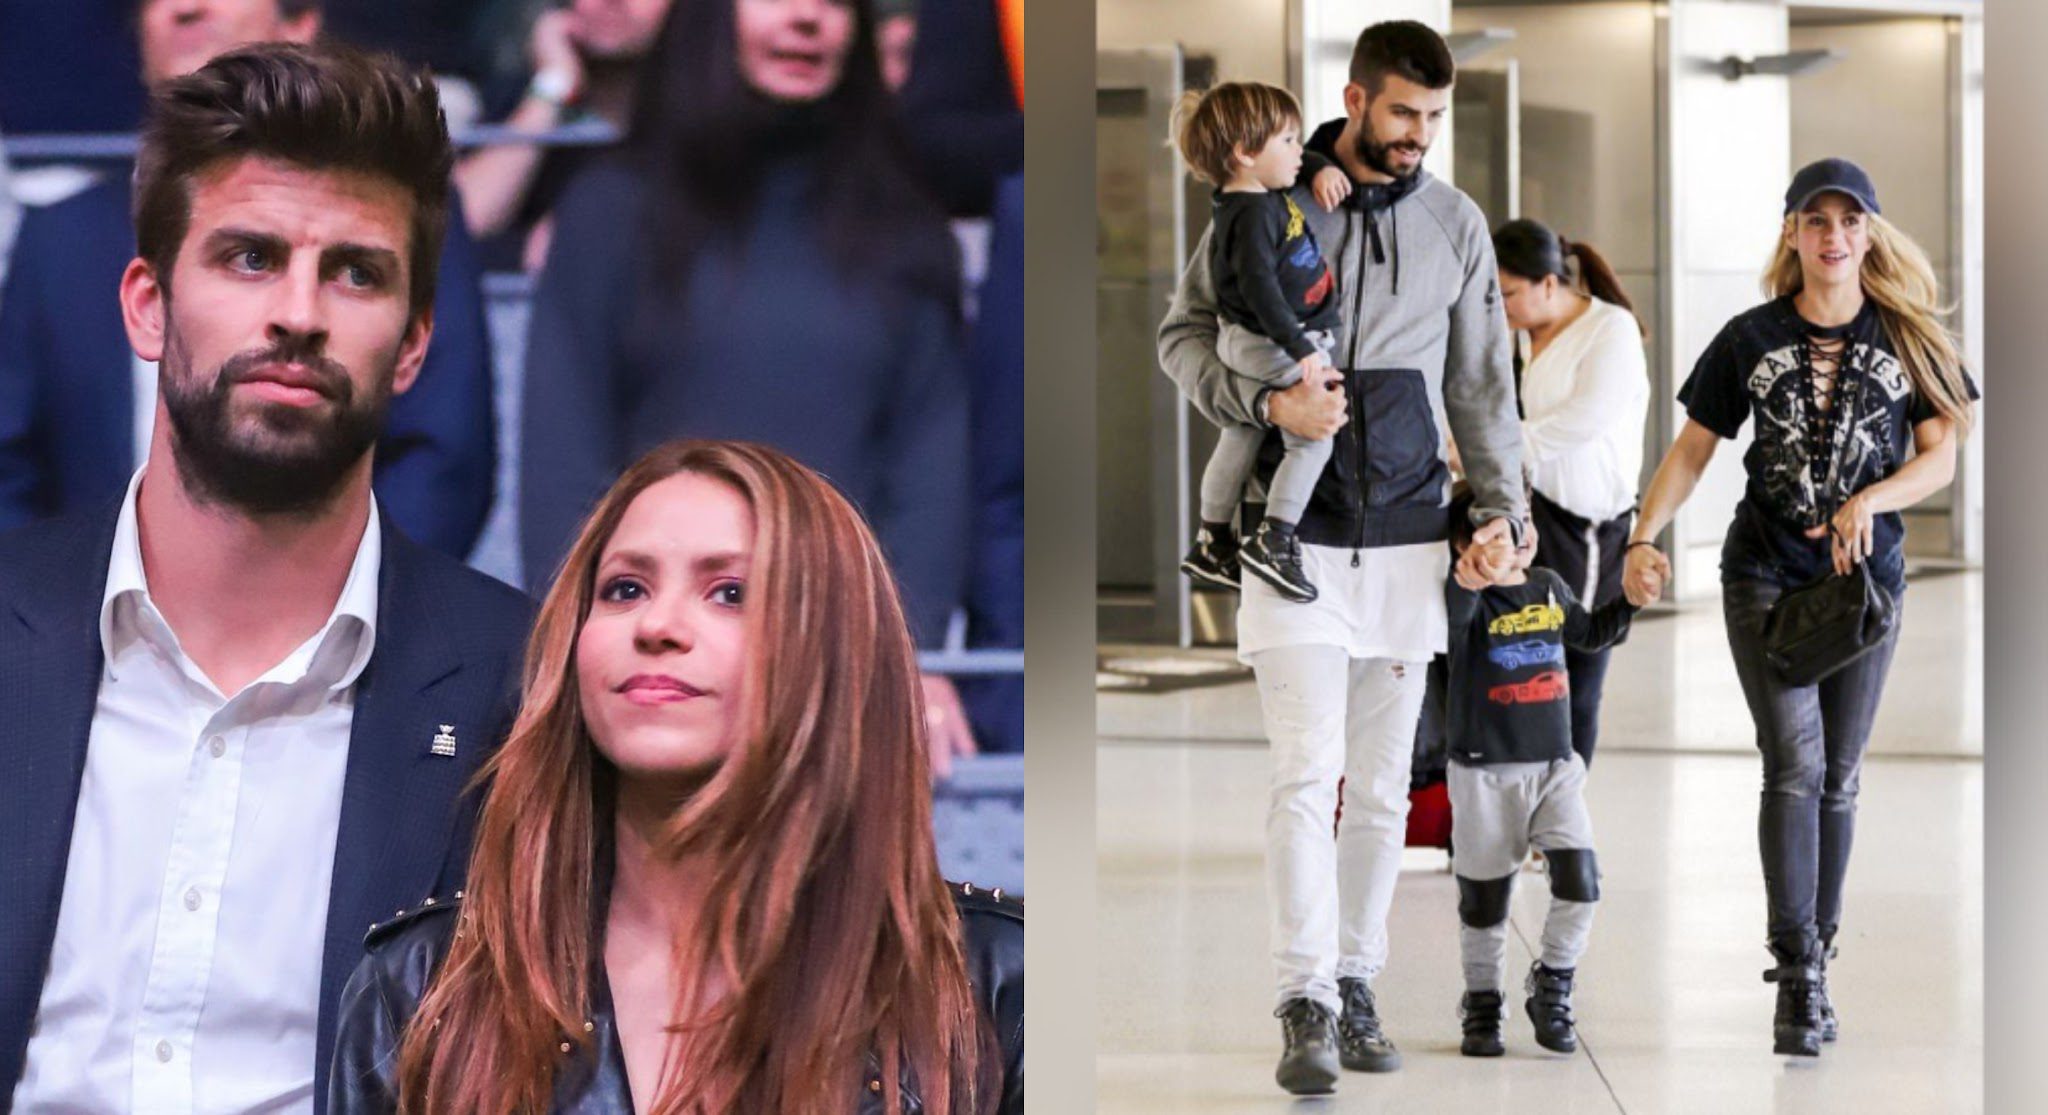 Colombian singer Shakira and partner Gerard Piqué breakup after 11 years